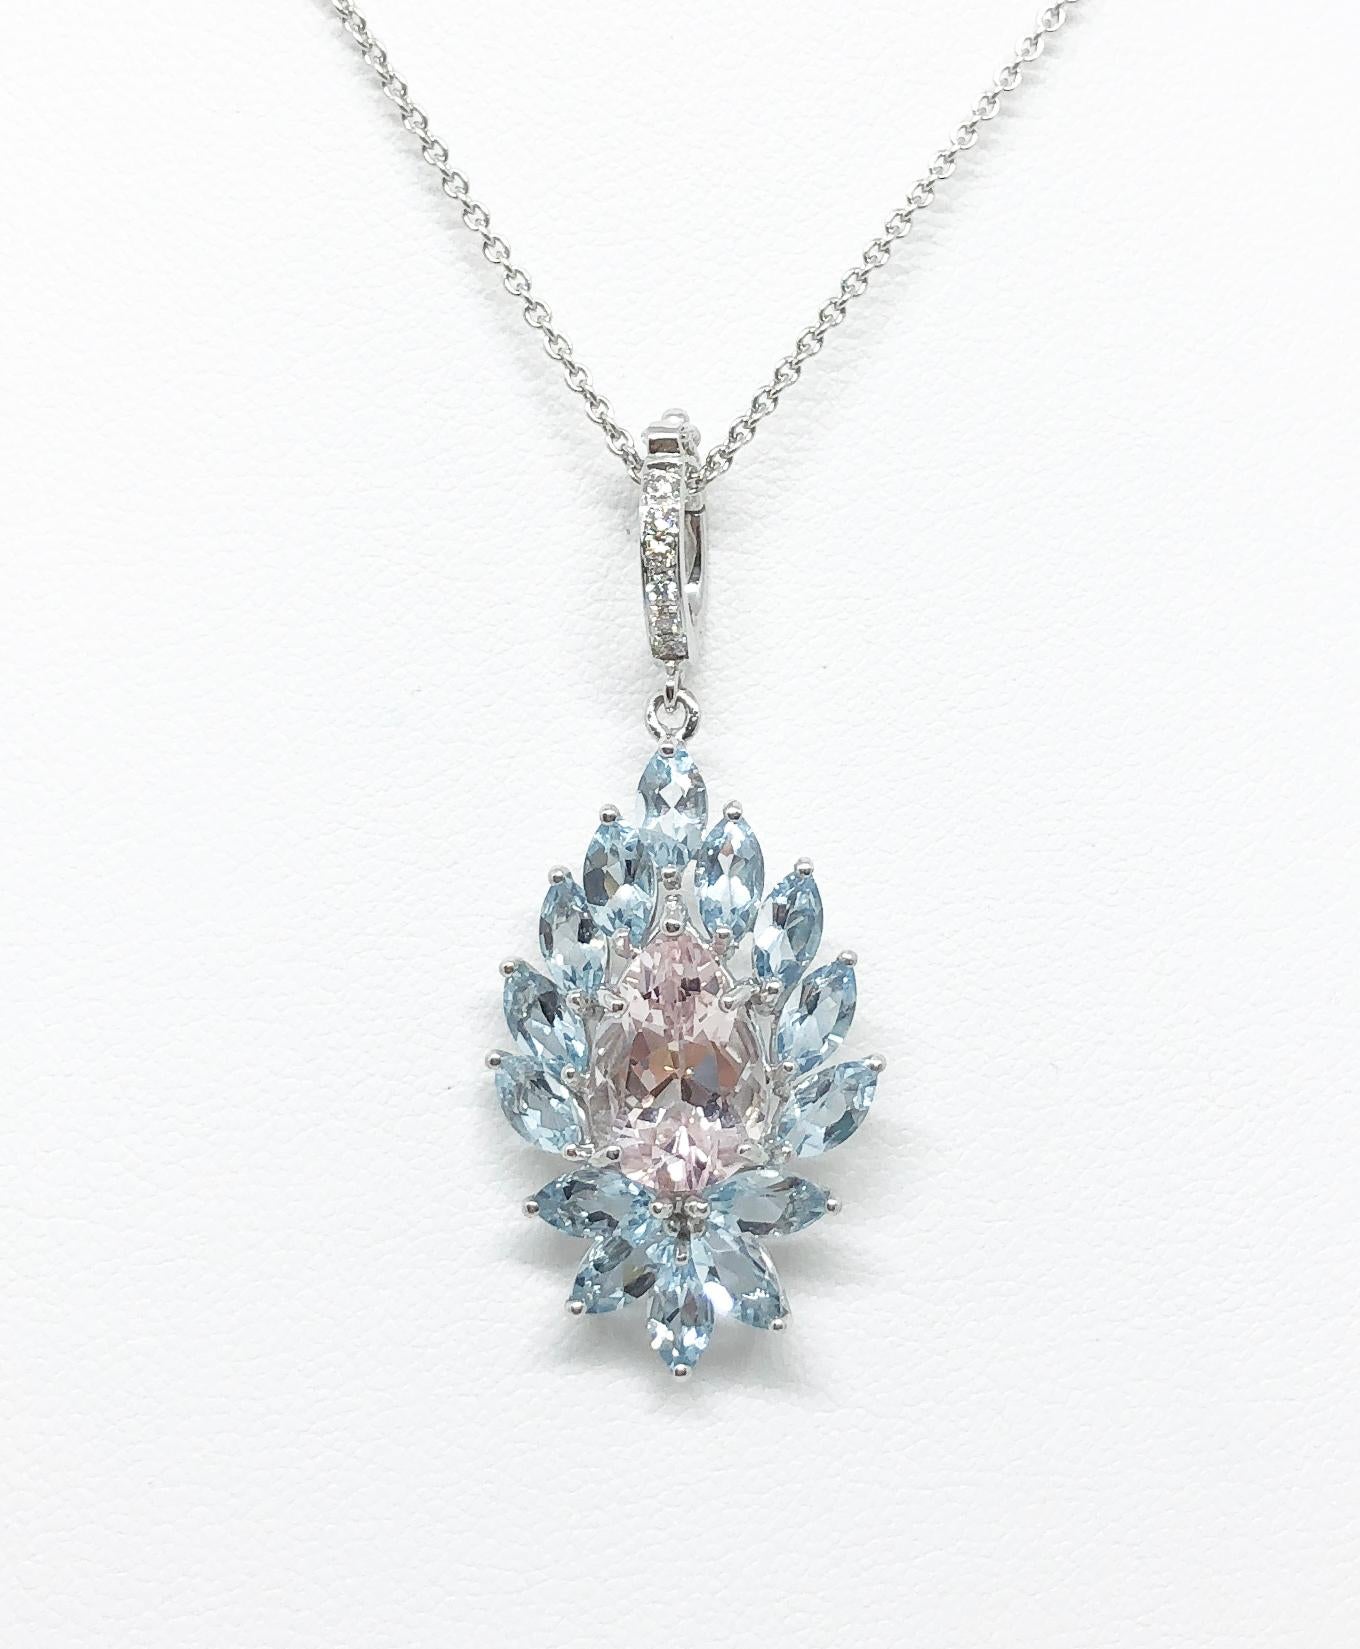 Aquamarine 2.98 carats, Morganite 2.66 carats and Diamond 0.06 carat Pendant set in 18 Karat White Gold Settings
(chain not included)

Width: 1.8 cm 
Length: 4.0cm
Total Weight: 4.94 grams

